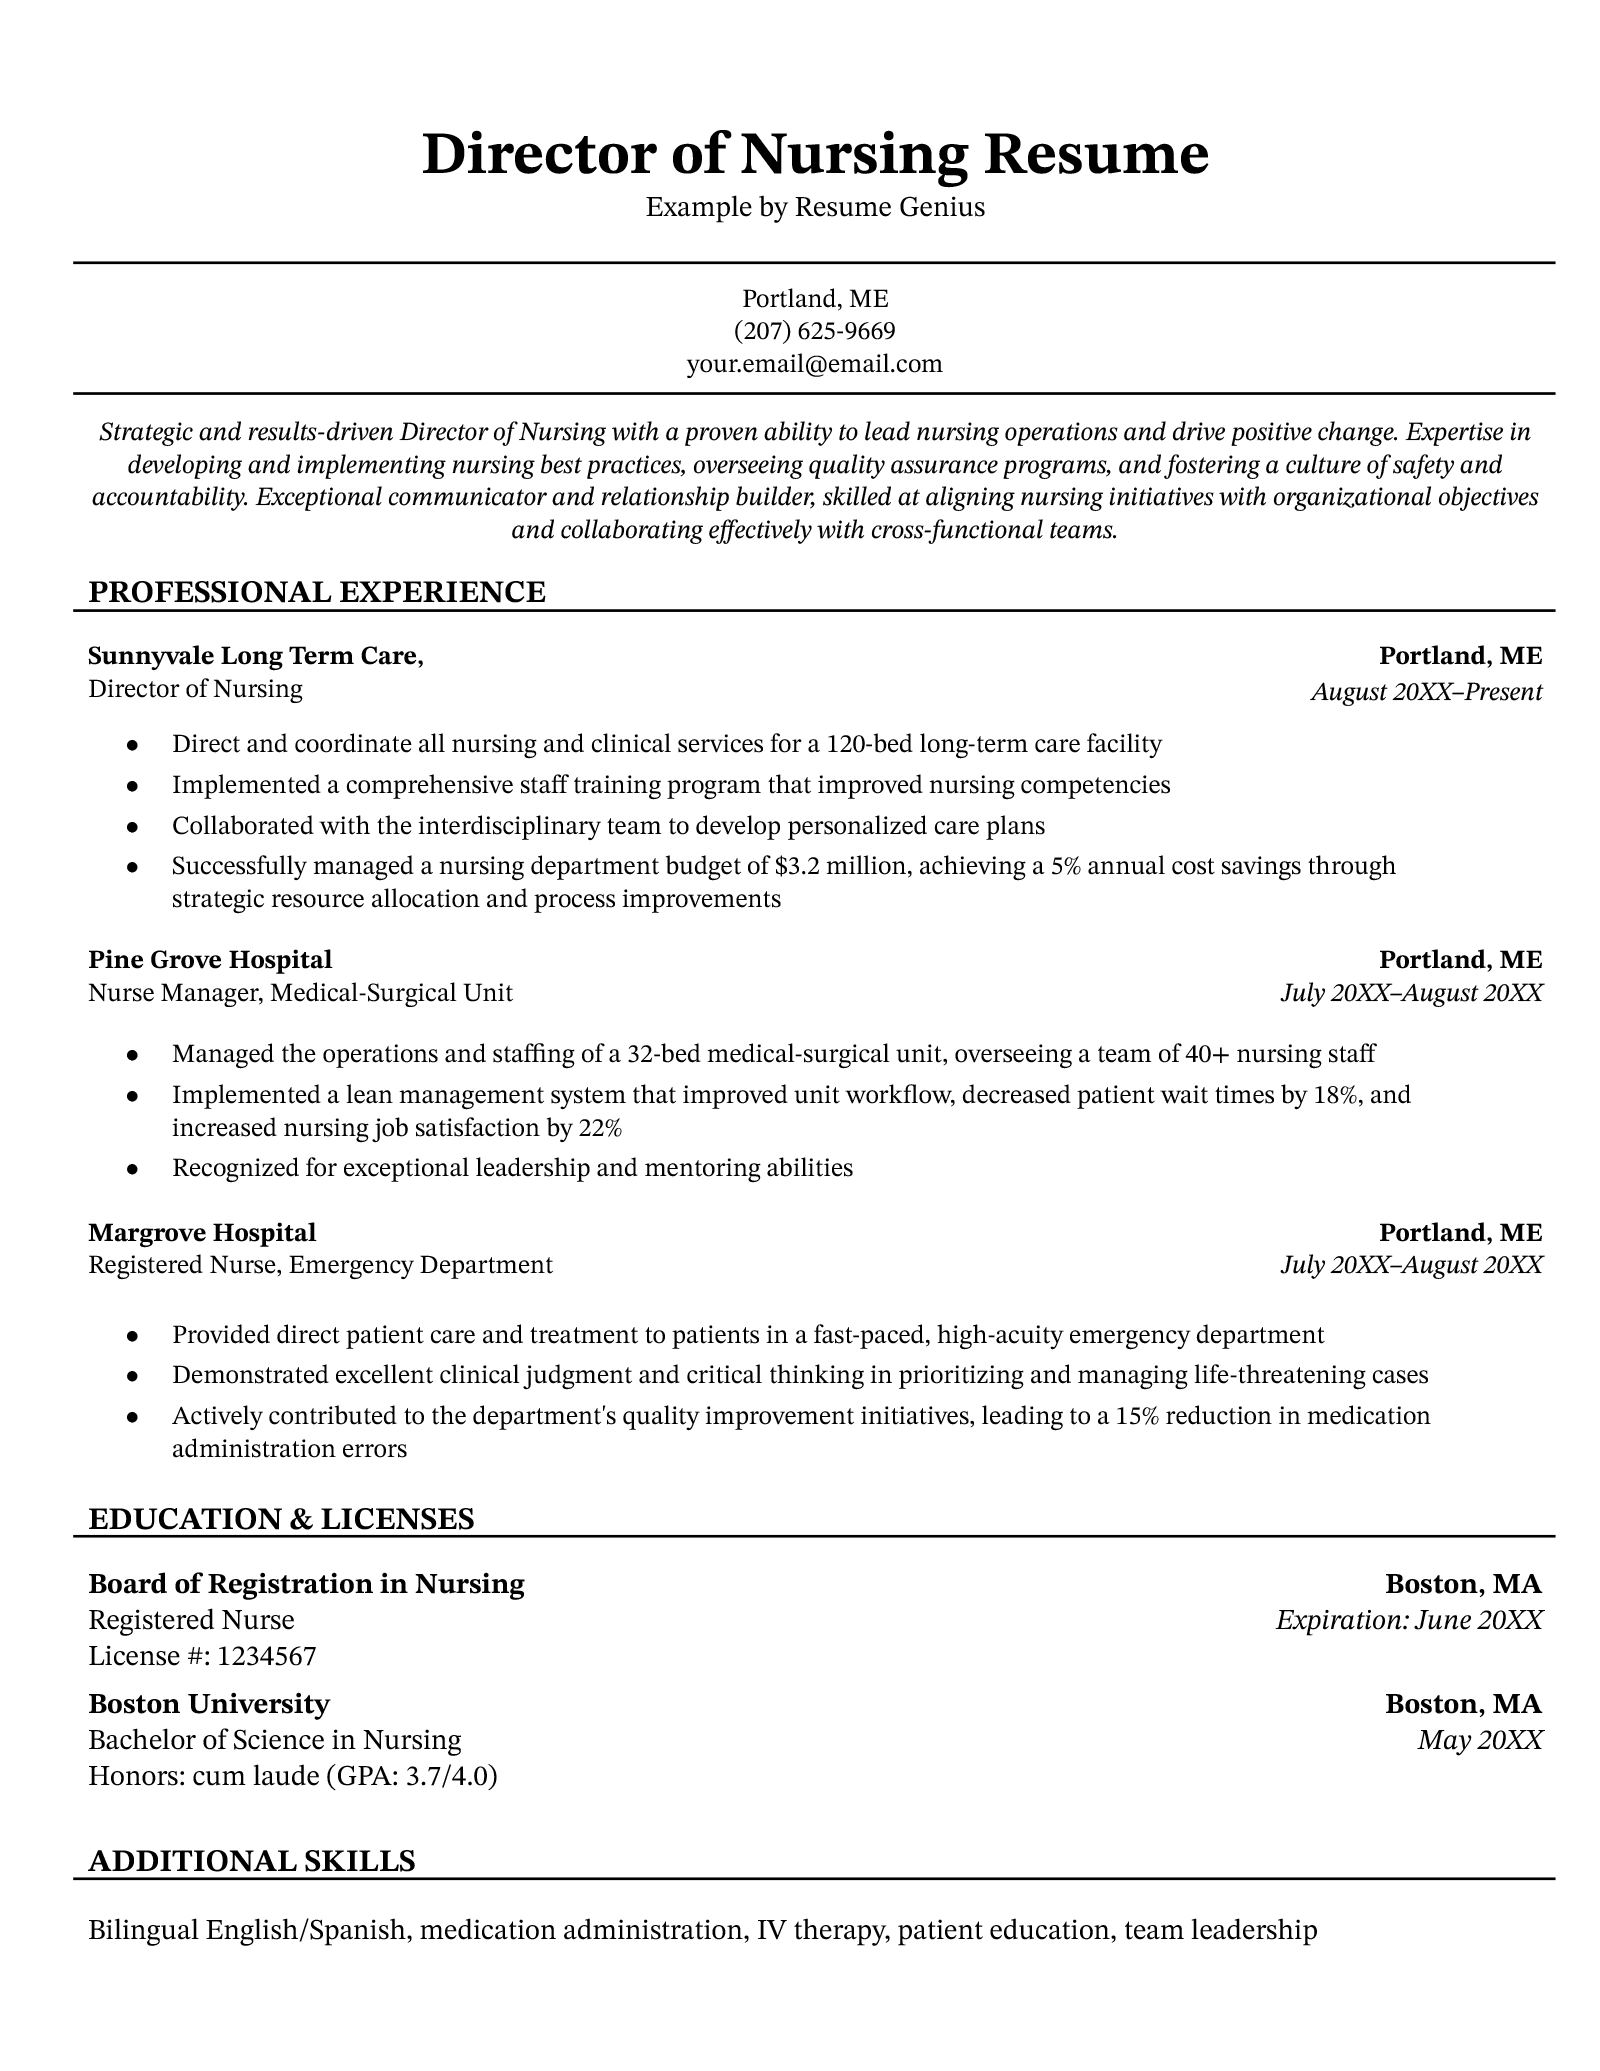 An example resume for a director of nursing.